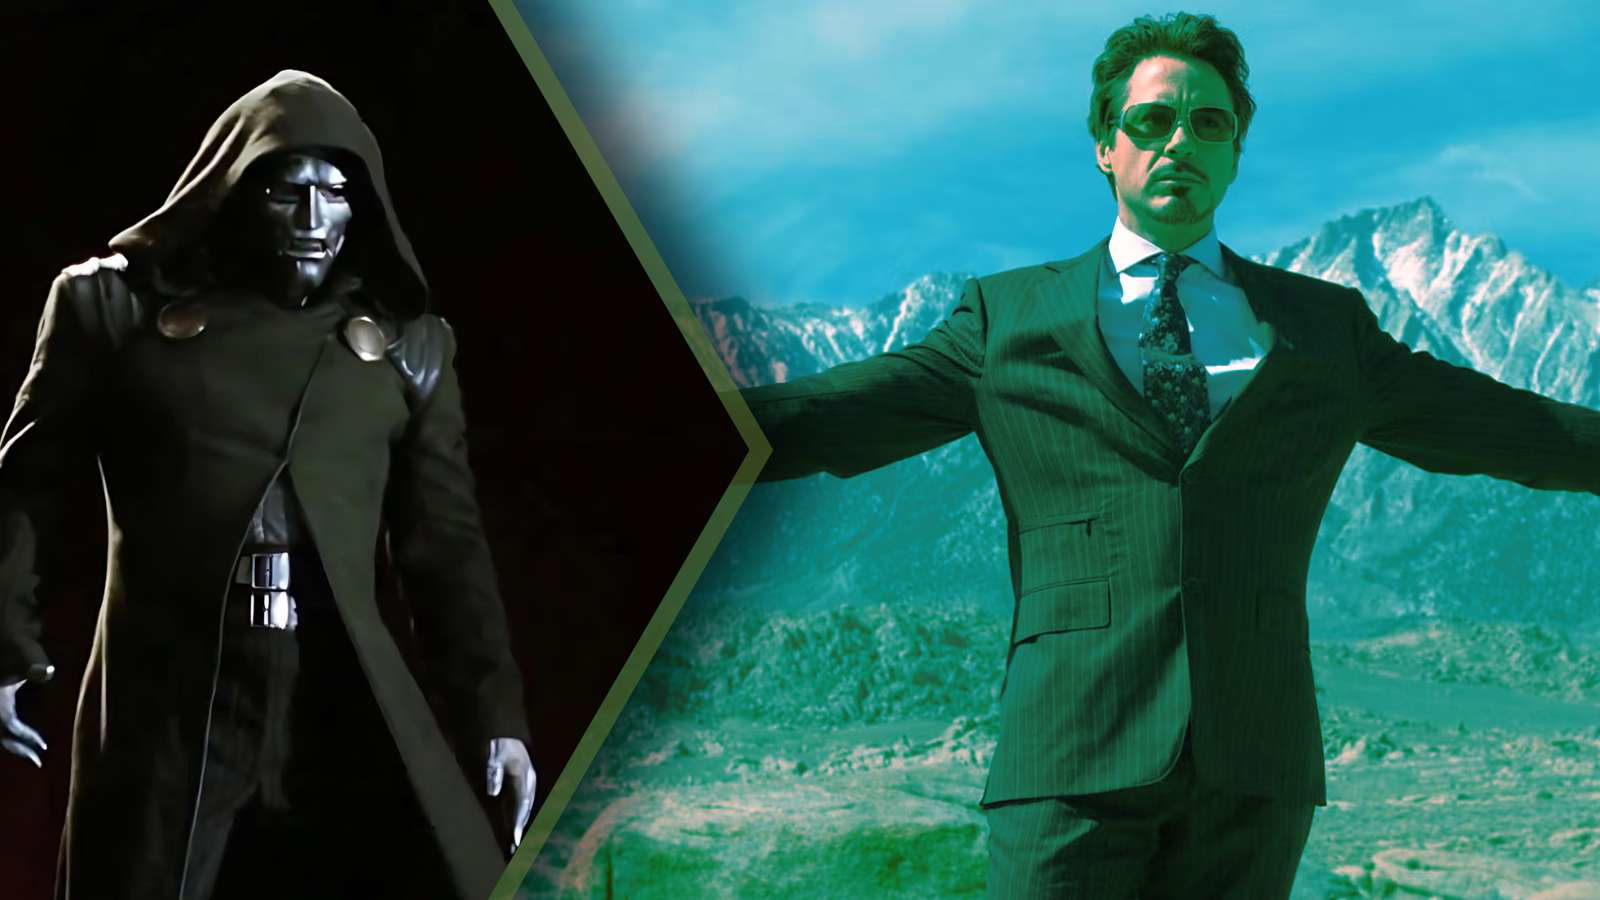 “Thank god they were wrong”: MCU Fans Hilariously Guessed 2 Highly Disliked Superhero Actors Could Be Playing Doctor Doom Right Before Robert Downey Jr.’s Reveal